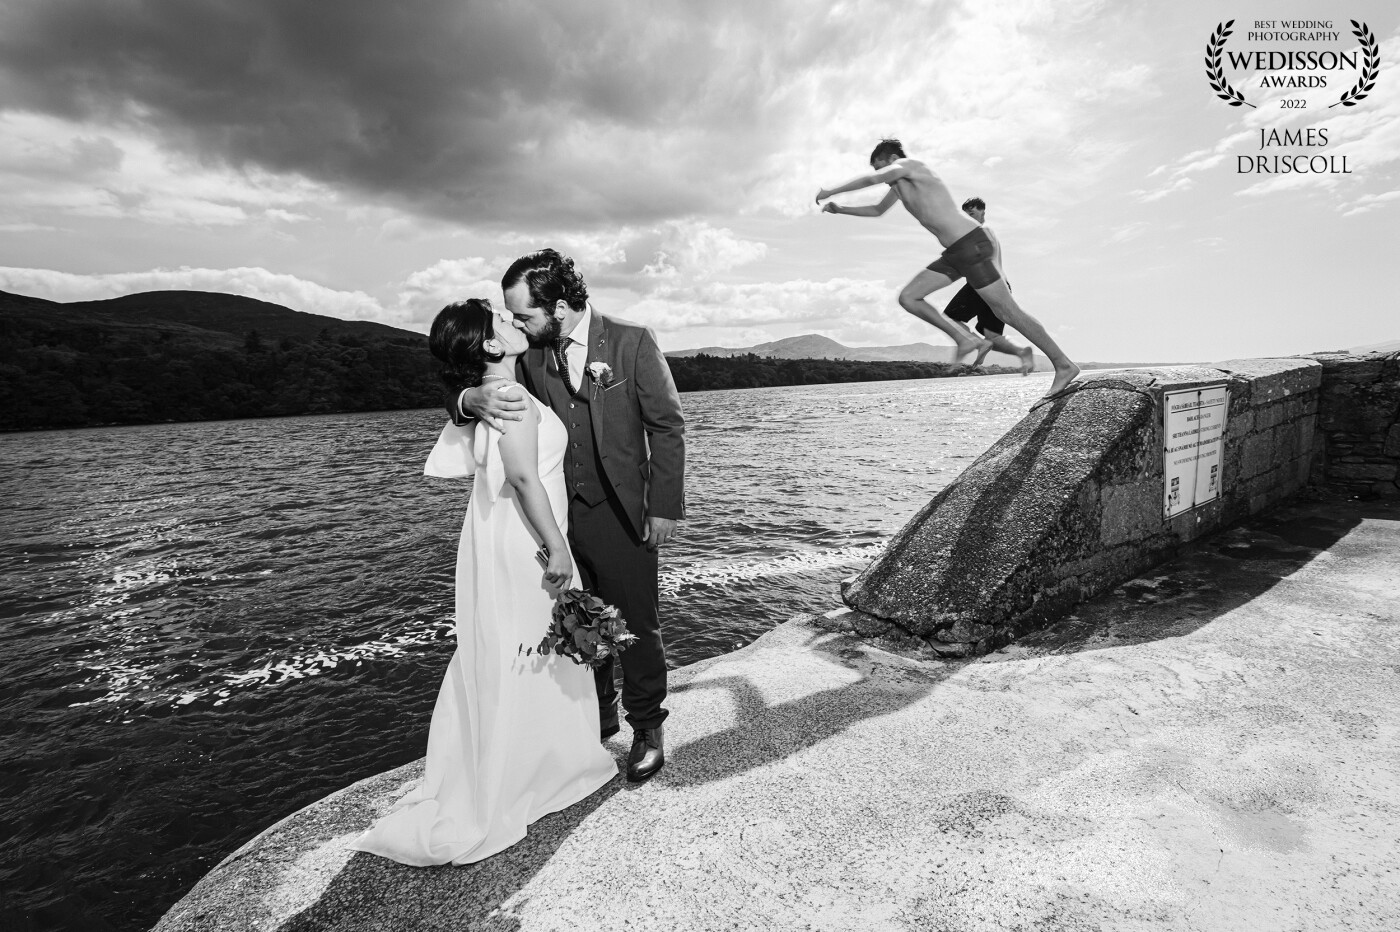 Kenmare Down in the Kingdom of Kerry.<br />
We were walking back to the car when i noticed these kids jumping off the pier.<br />
<br />
Told my couple to wait one second while i ran over to the kids and asked them how would they like to be in a wedding picture. They were well up for it. So i called my couple over and we timed this to perfection as they shared a kiss, the kids leap from the pier,,